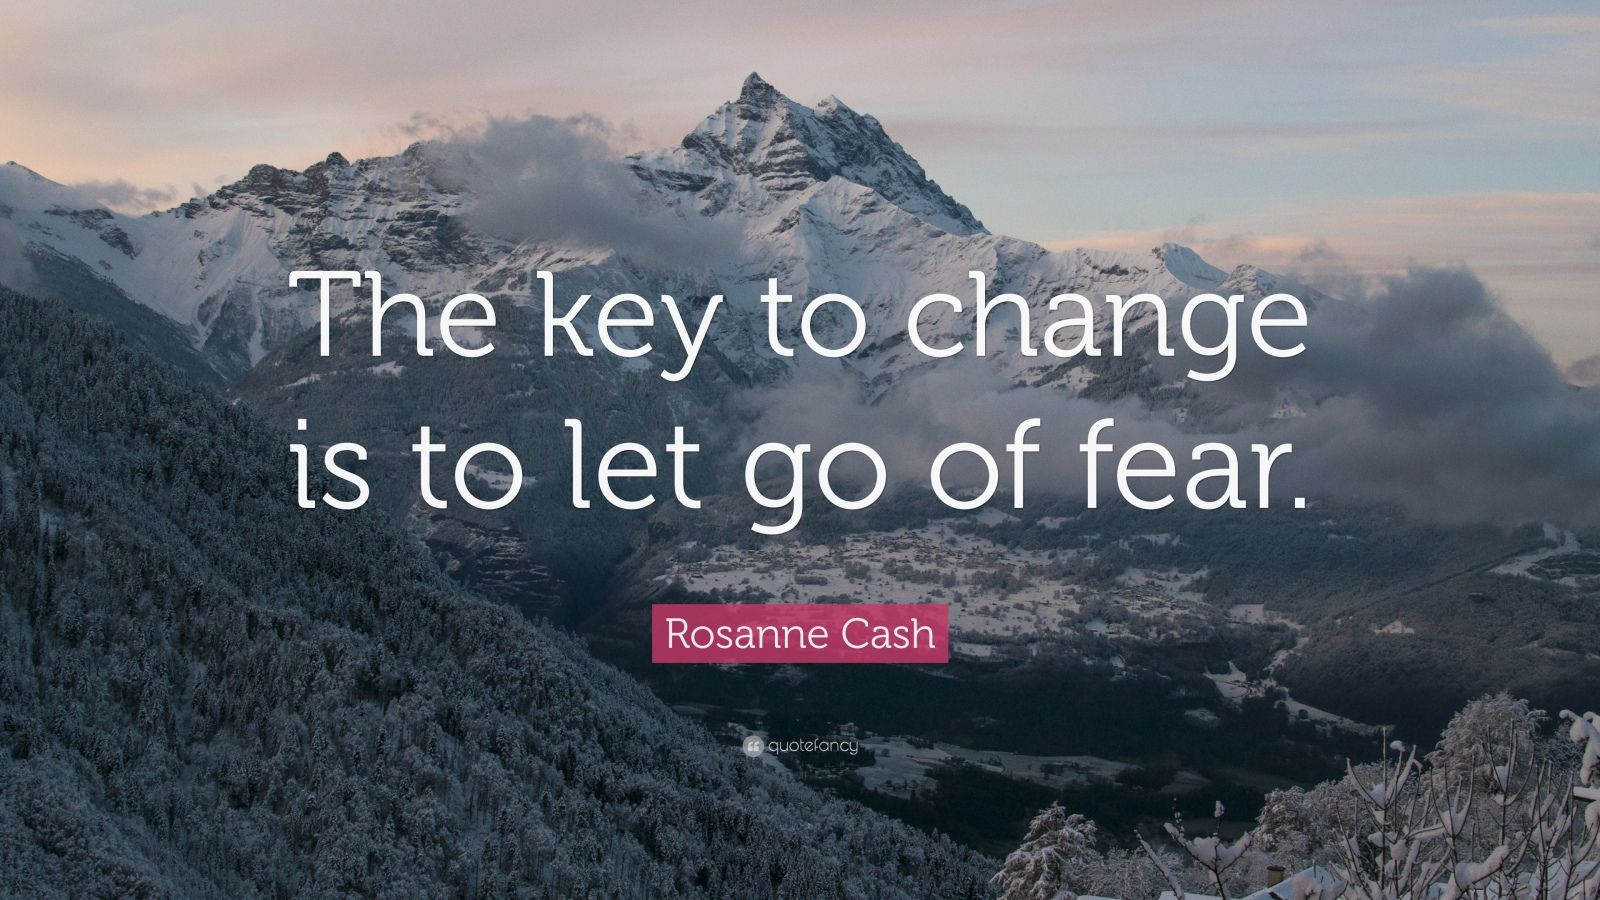 Rosanne Cash Quote: “The key to change is to let go of fear.” (30 ...